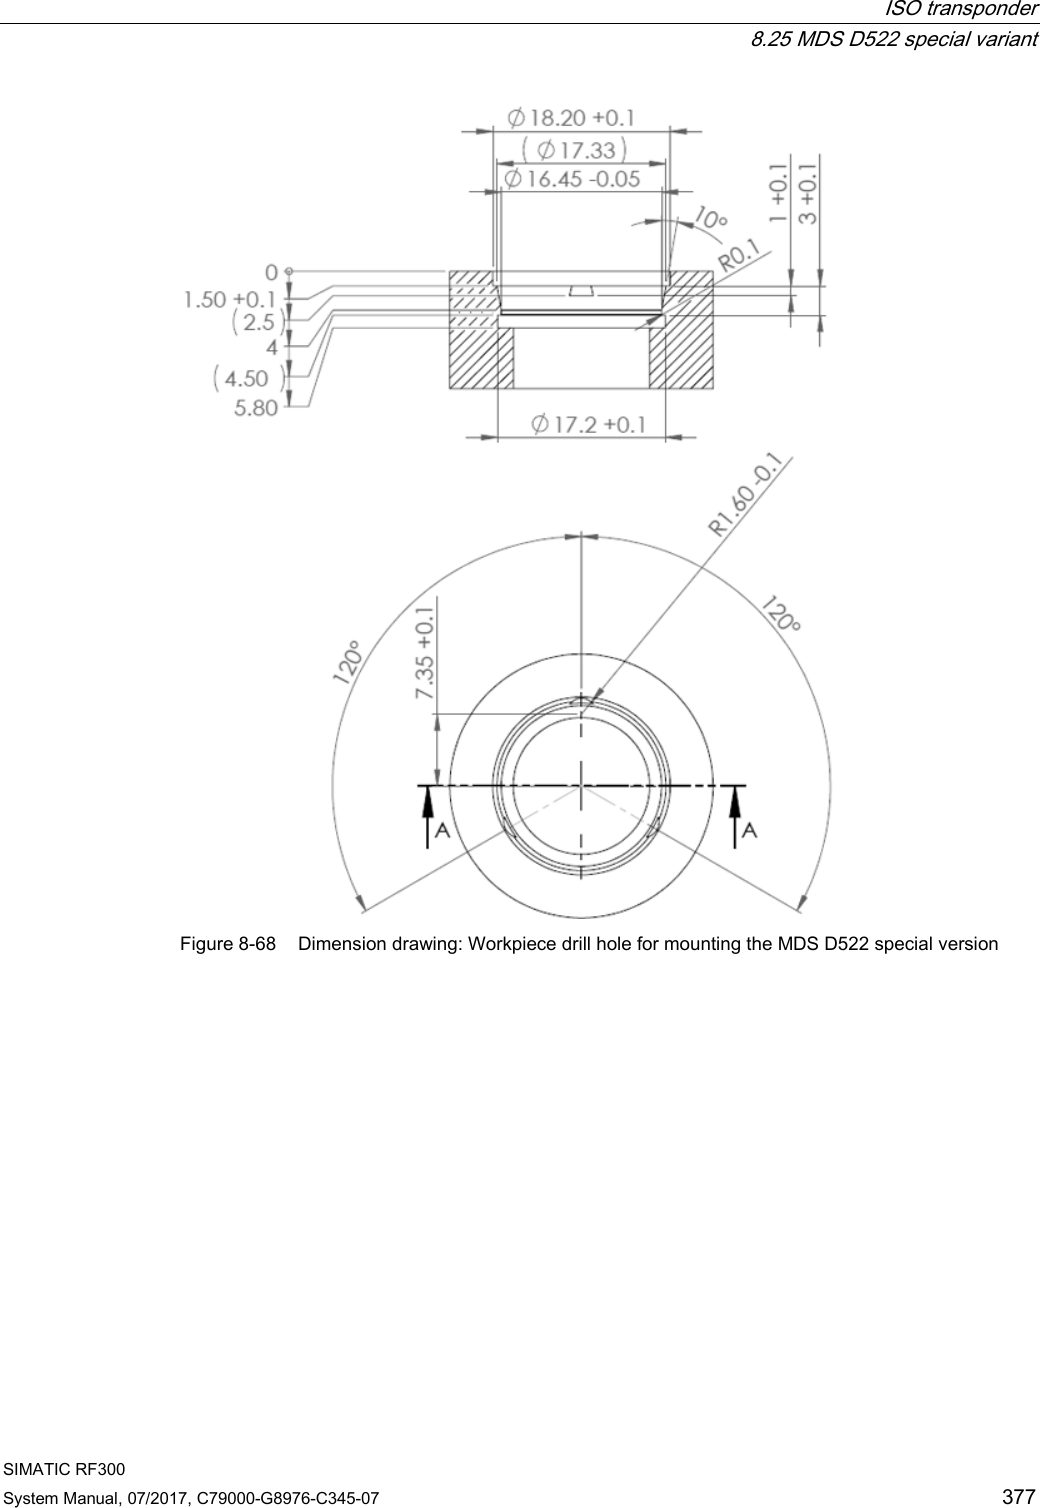  ISO transponder  8.25 MDS D522 special variant SIMATIC RF300 System Manual, 07/2017, C79000-G8976-C345-07 377  Figure 8-68 Dimension drawing: Workpiece drill hole for mounting the MDS D522 special version 